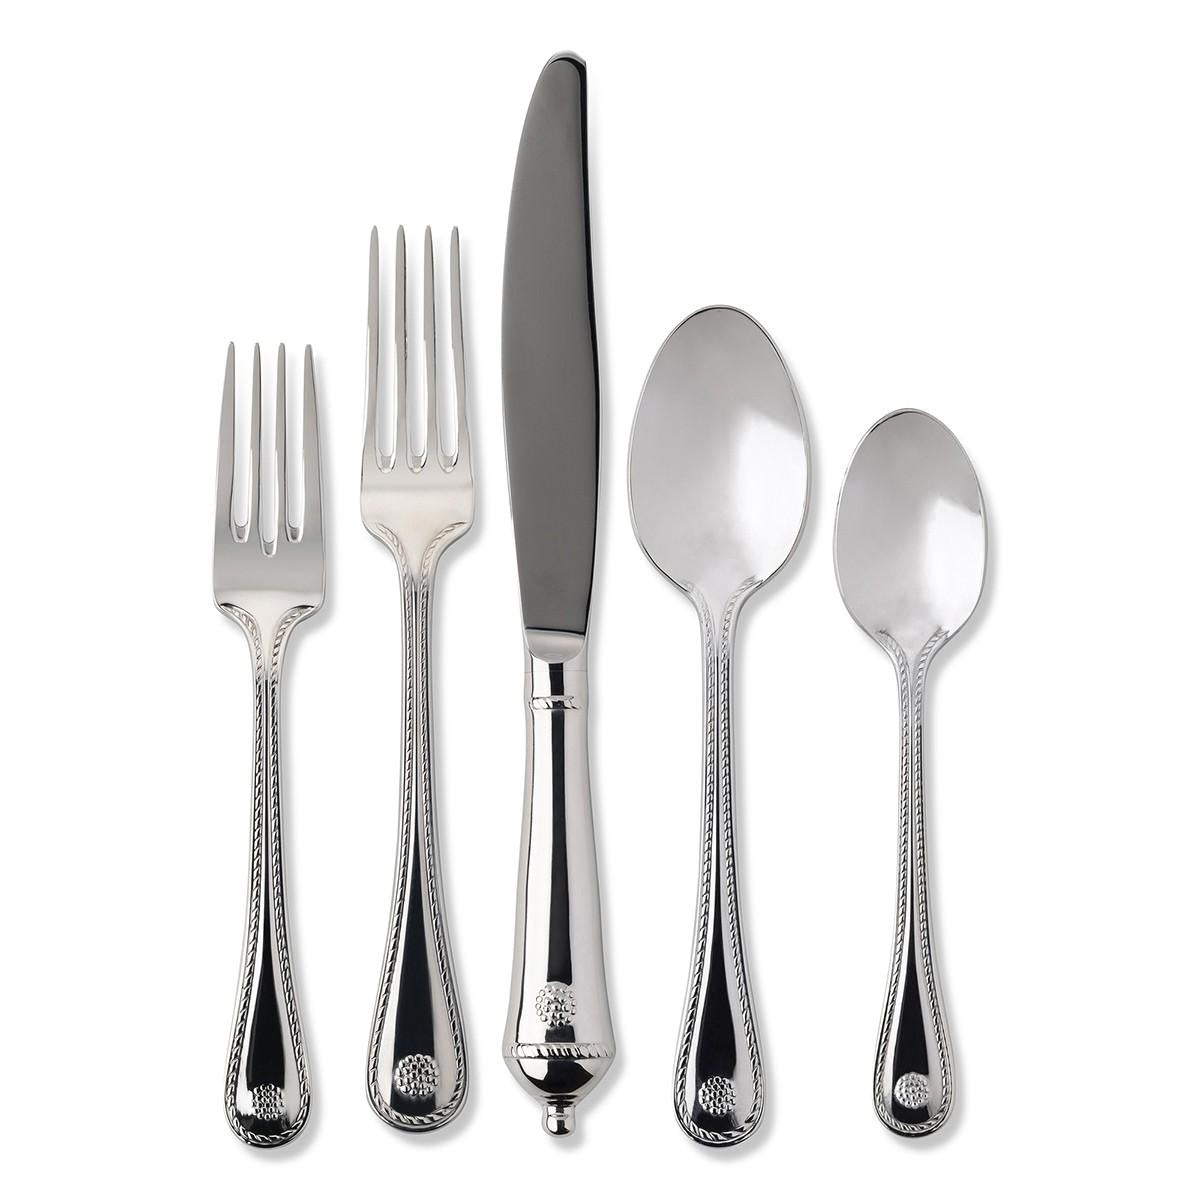 Berry & Thread 5-Piece Place Setting - Polished